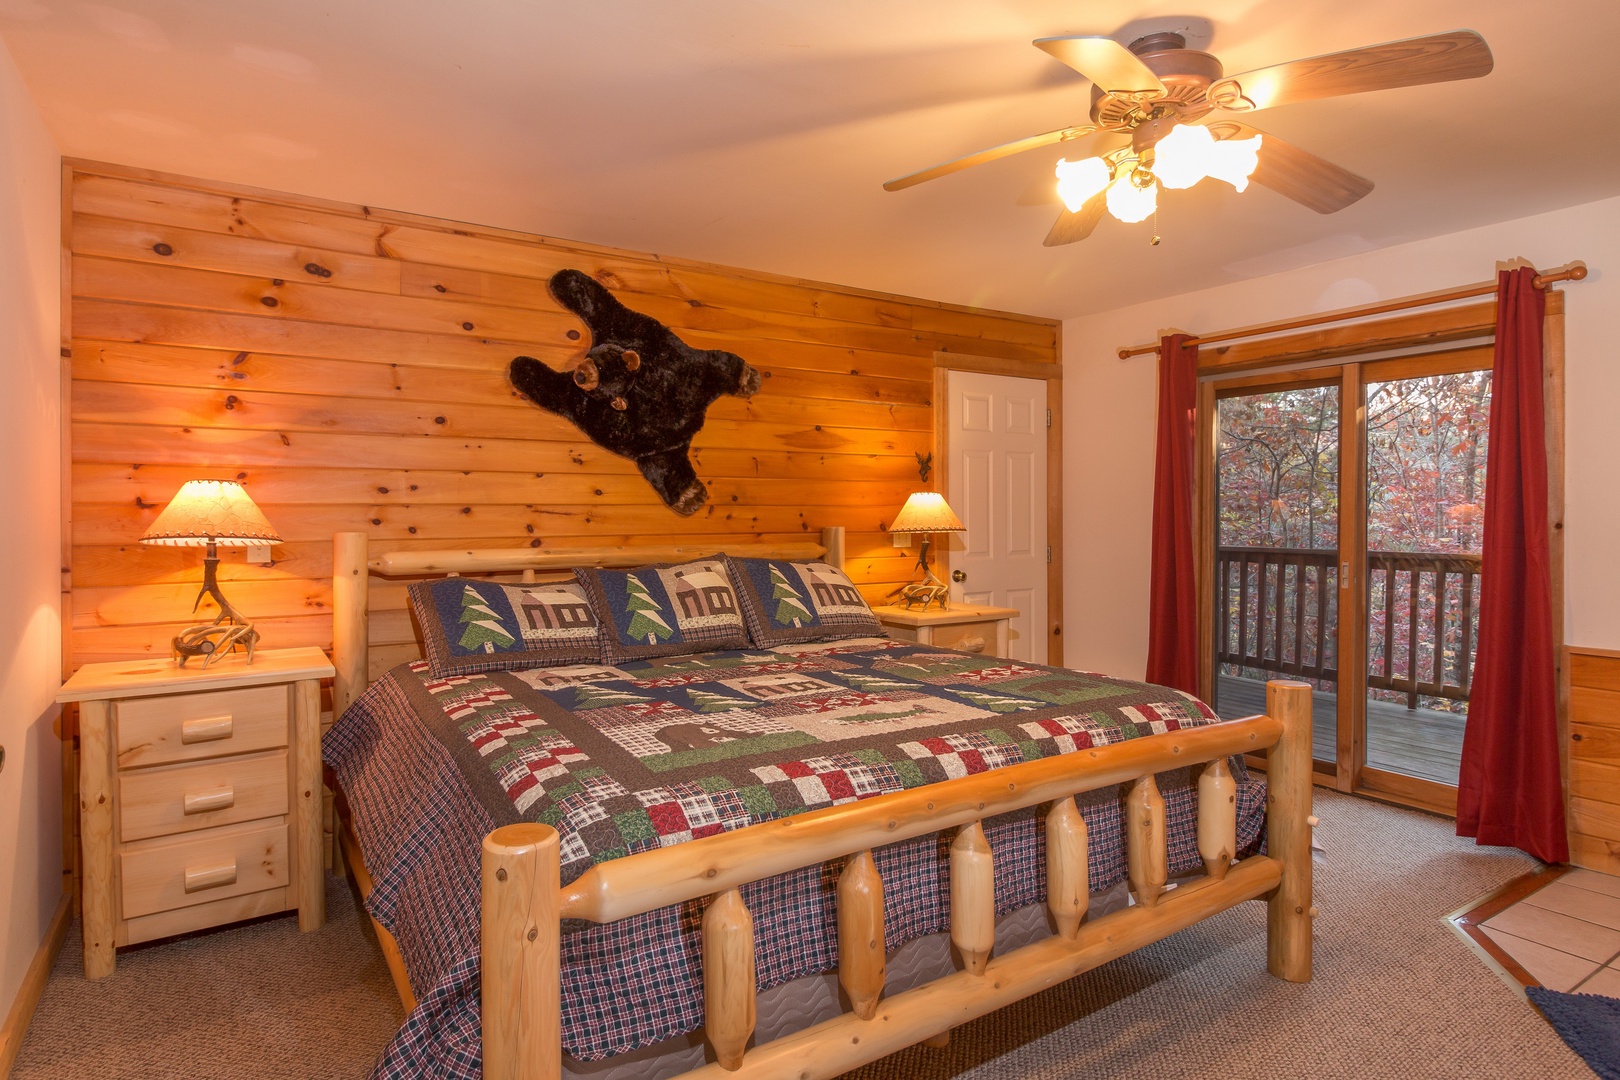 Bedroom with a log bed, night stands, lamps, and deck access at Just for Fun, a 4 bedroom cabin rental located in Pigeon Forge